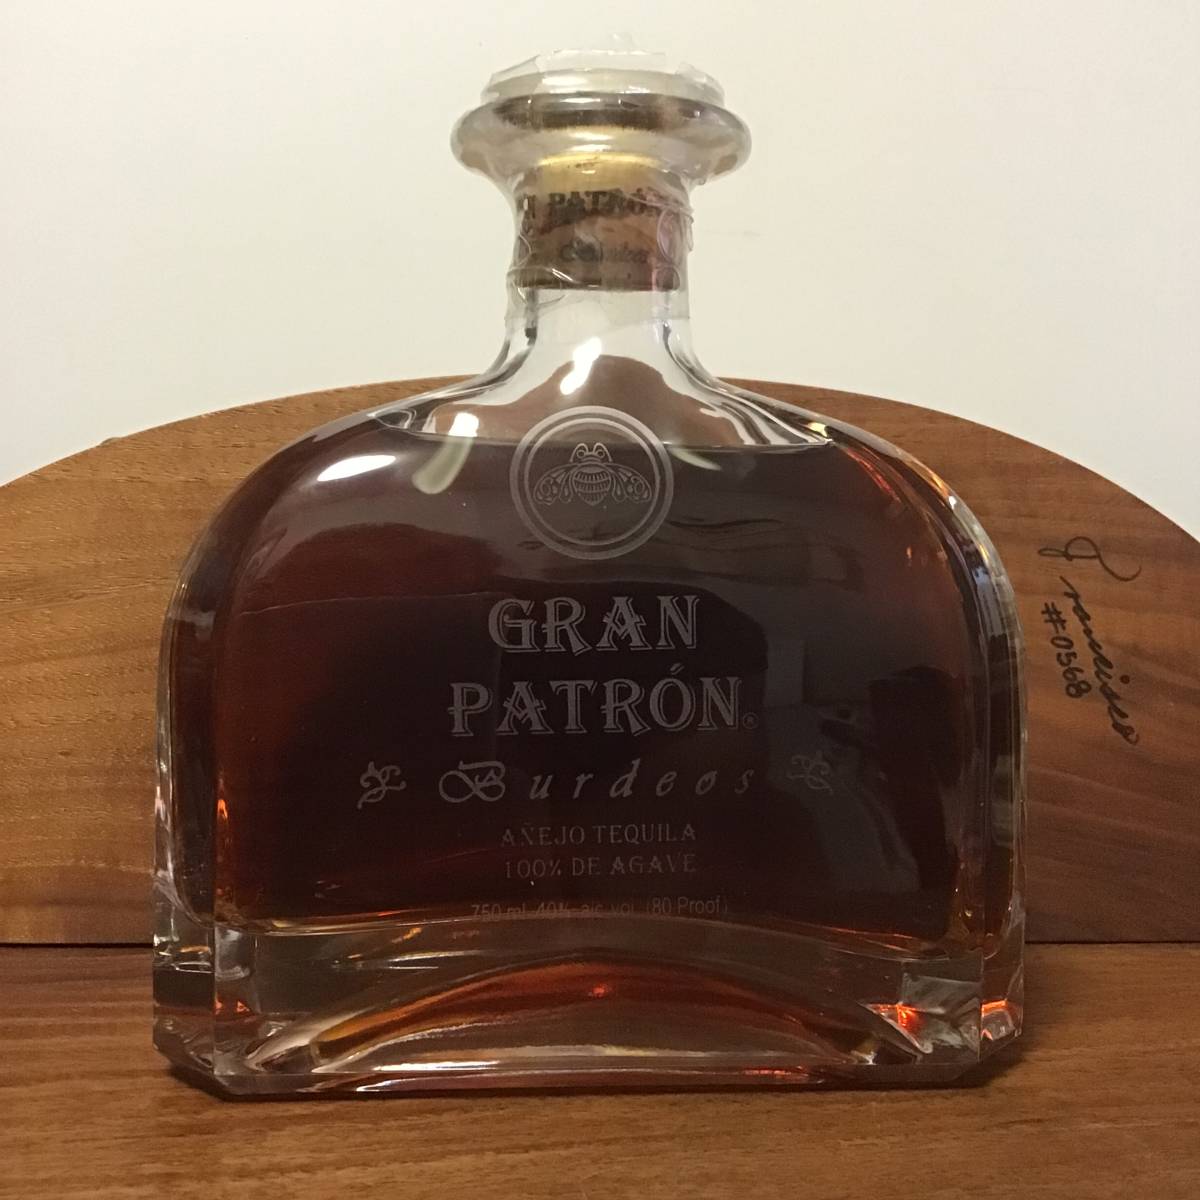  super valuable [ the first times Release not yet . plug ]GRAN PATRON BURDEOS ANEJO no.0568pato long extra premium ane ho tequila 40% 750ml Spirits 